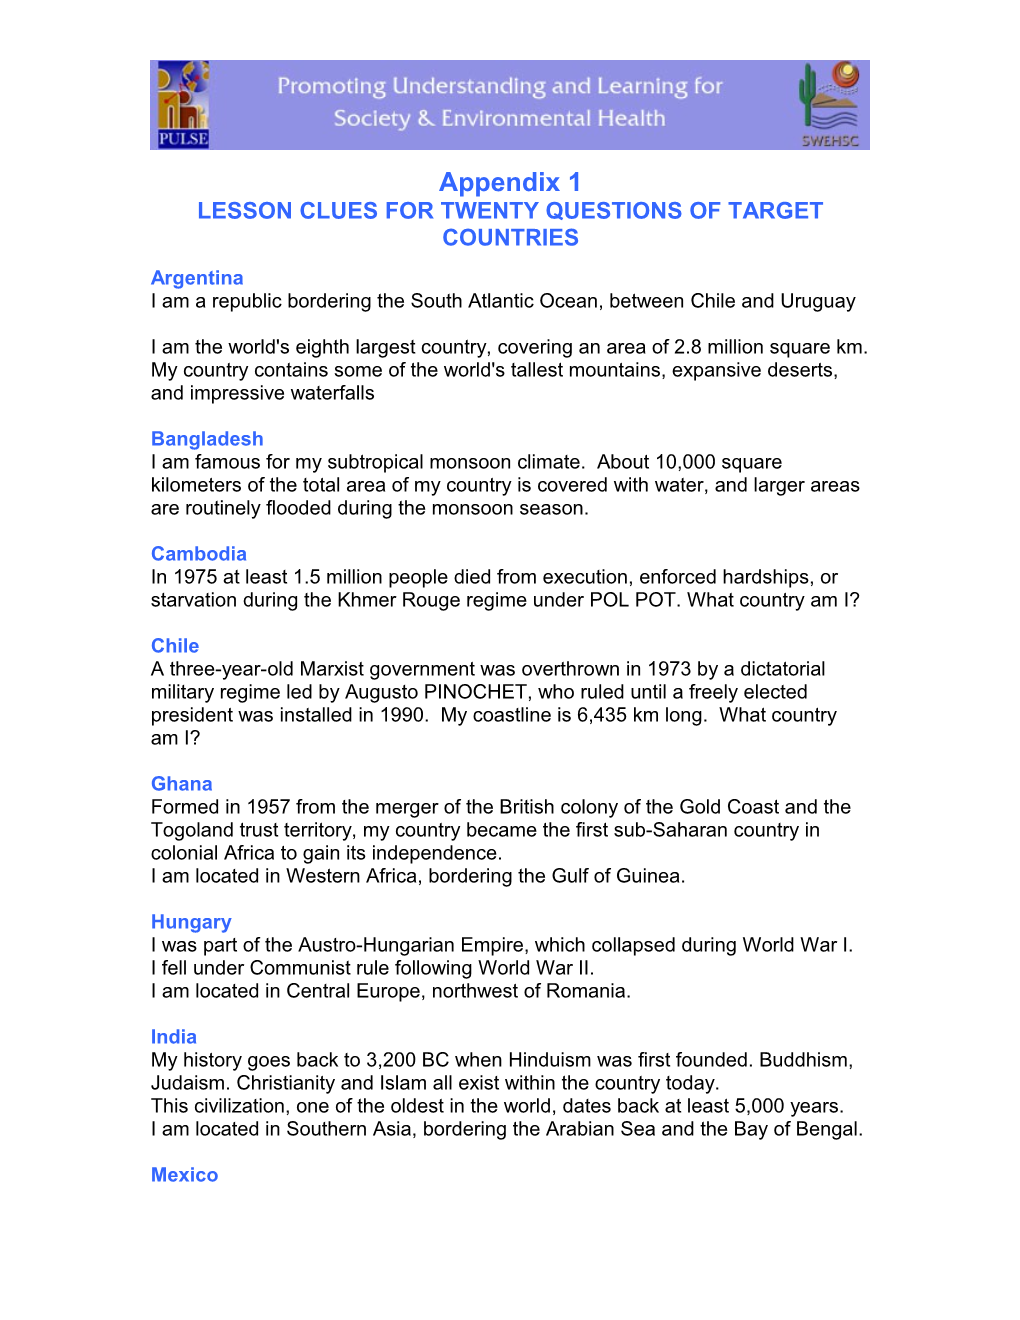 Appendix 1: LESSON CLUES for TWENTY QUESTIONS of TARGET COUNTRIES